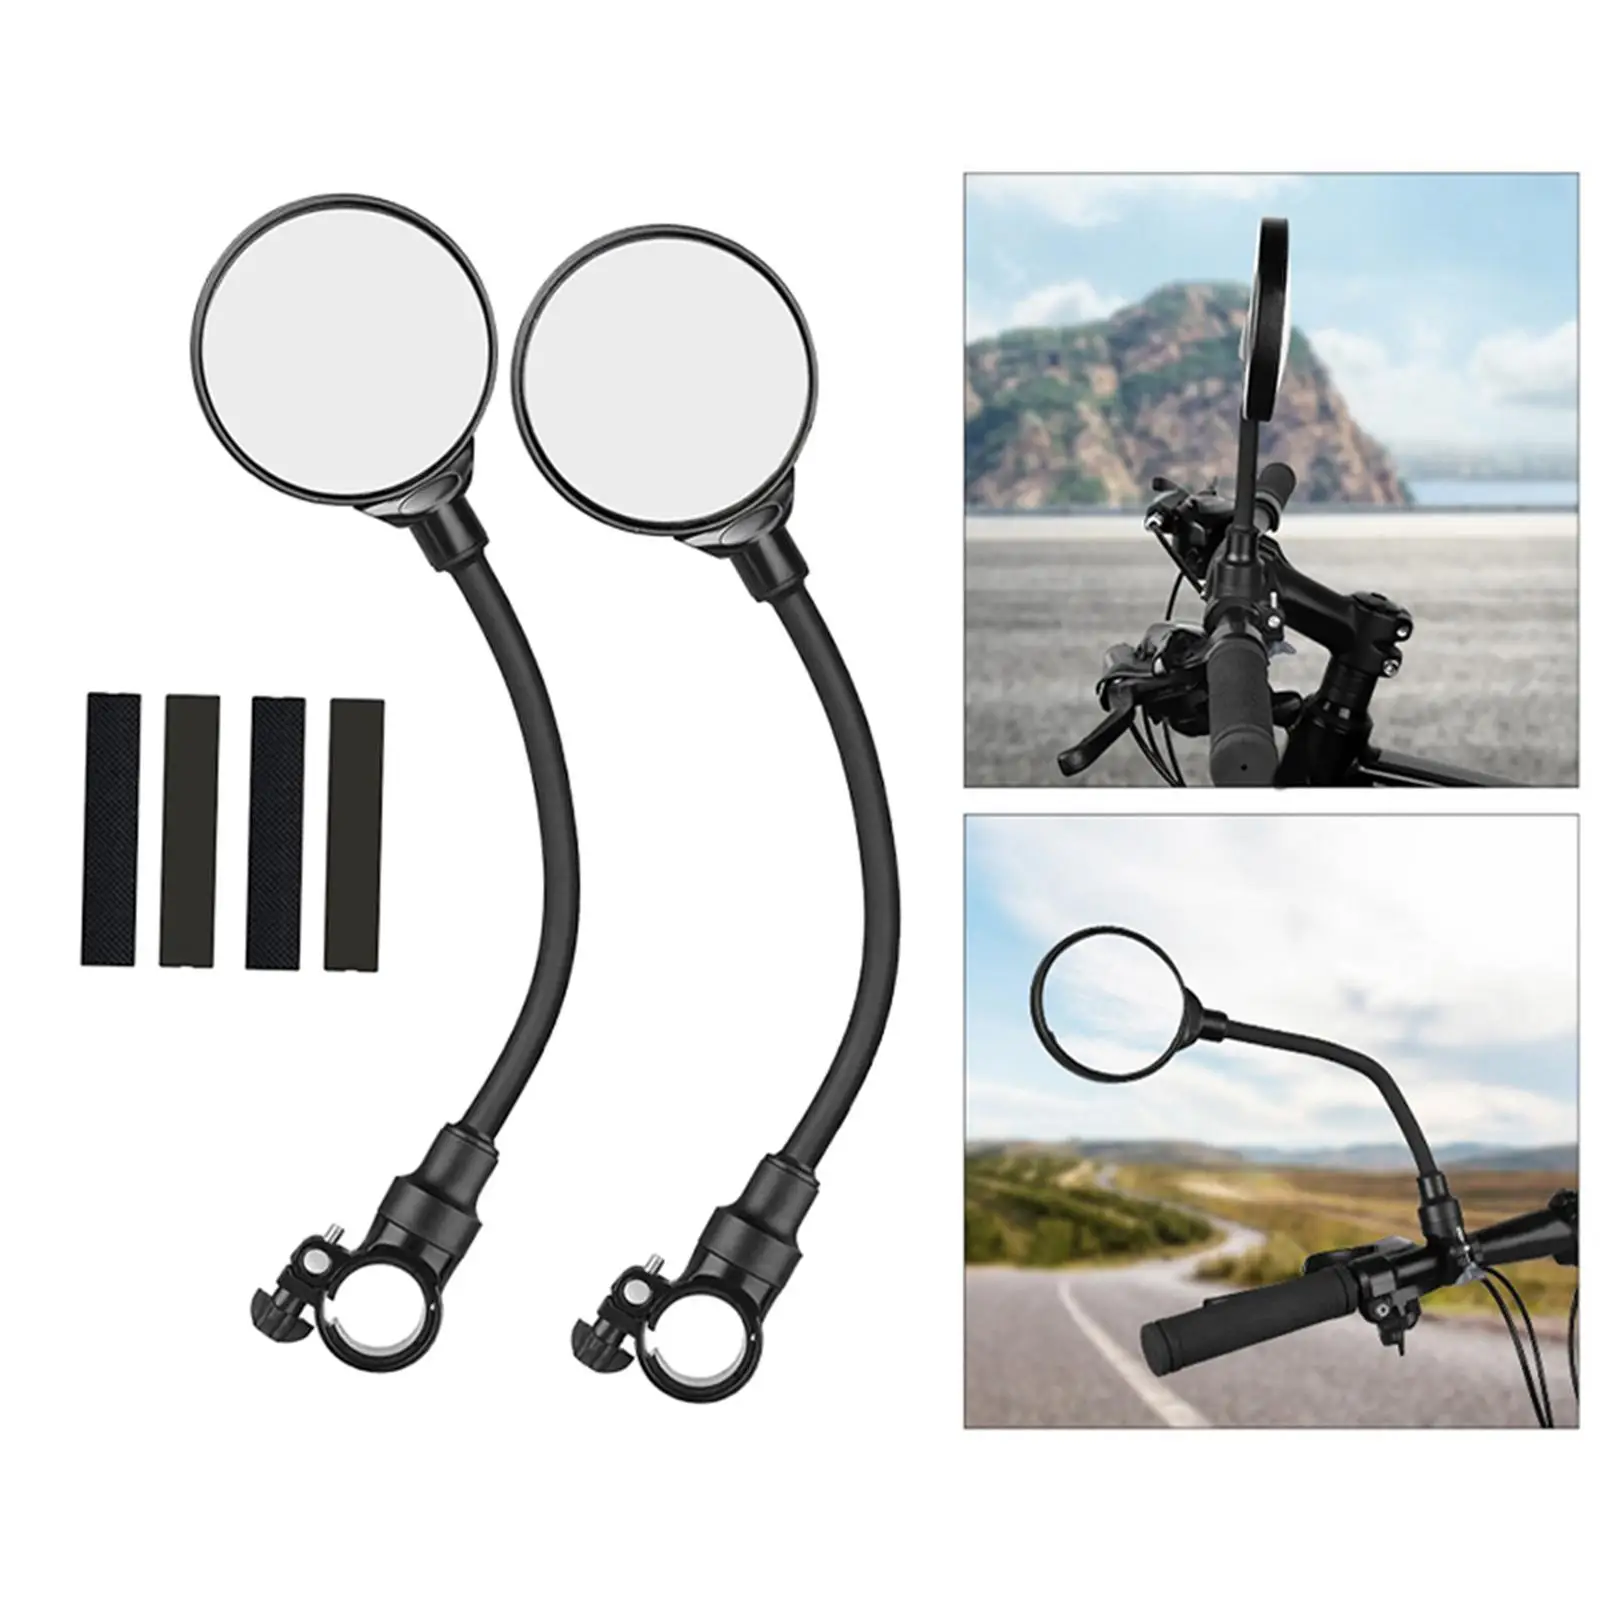 Bike Mirror Bicycle Rear View Mirrors Wide Angle Riding Motorcycle Universal